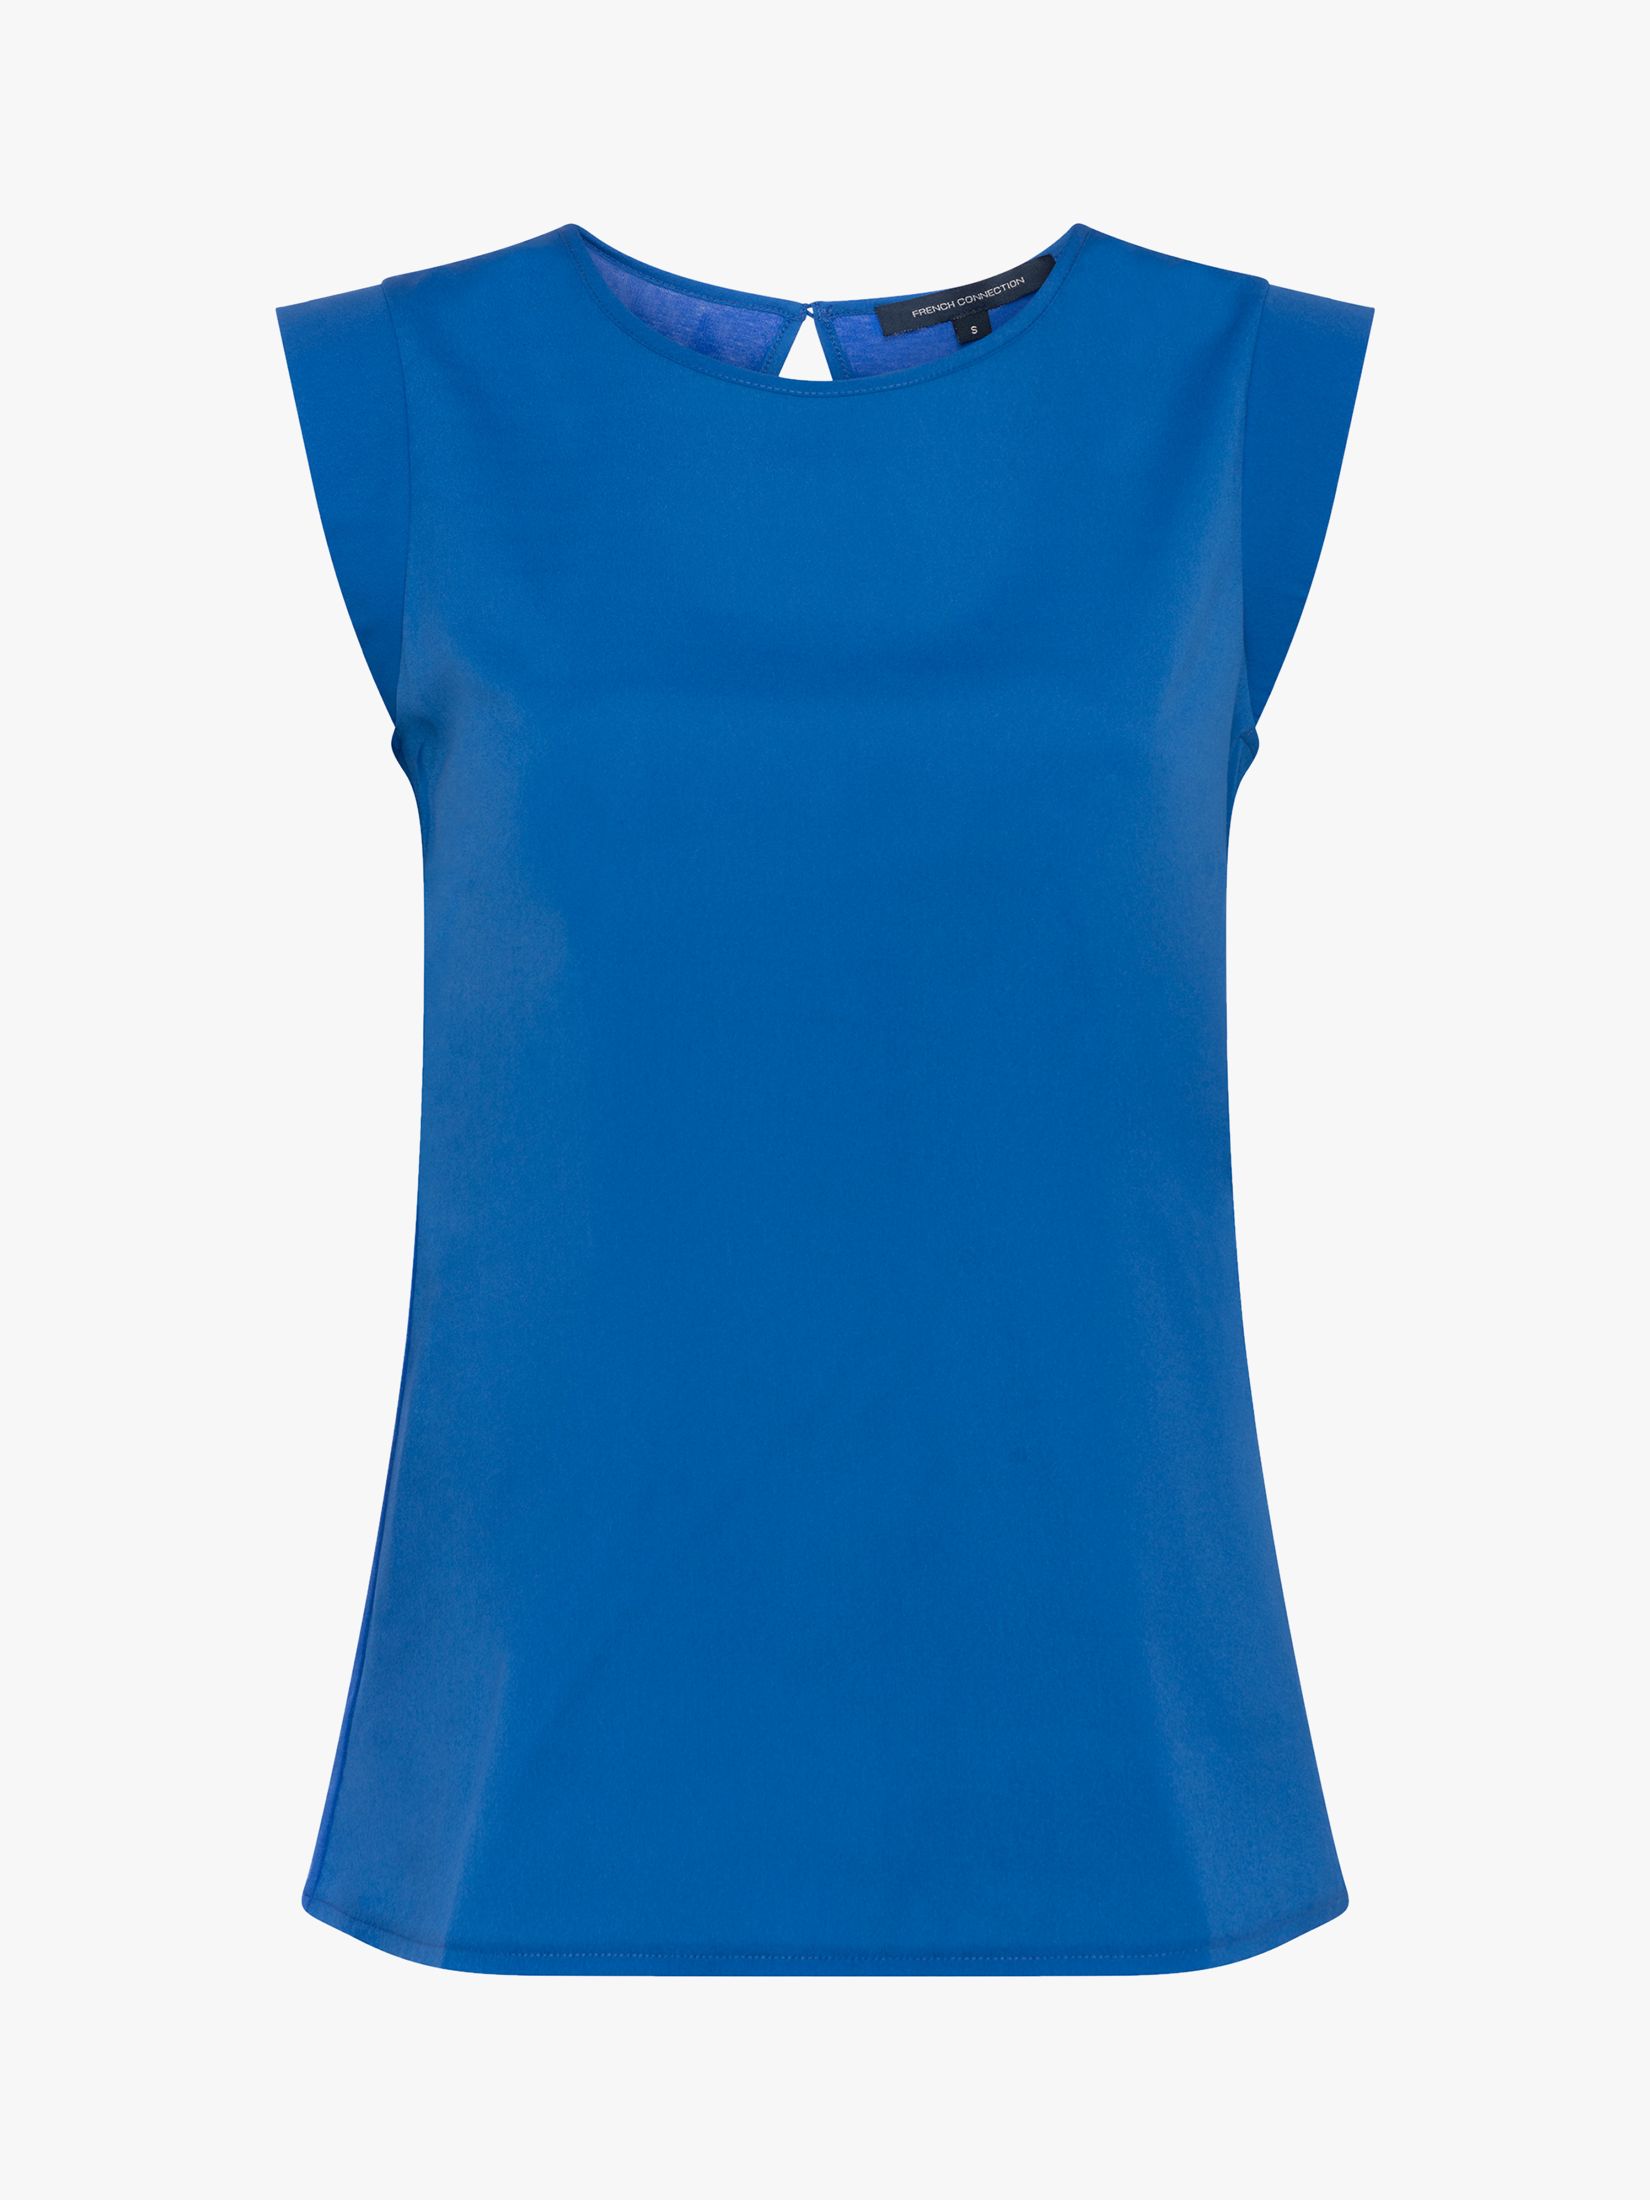 French Connection Crepe Cap Sleeve Top, Ceramic Blue at John Lewis ...